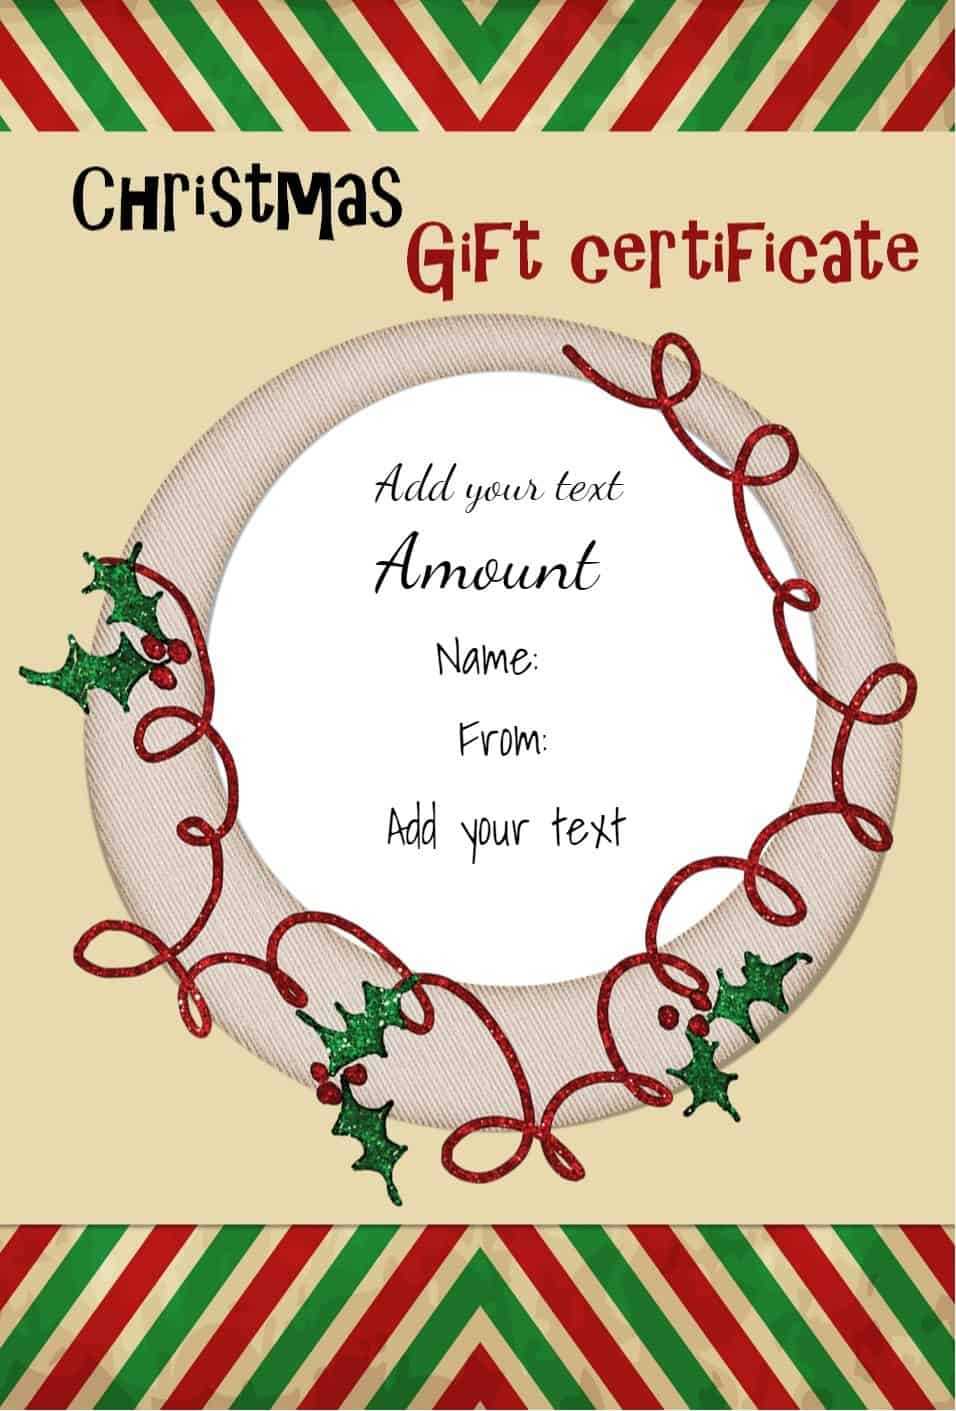 Free Christmas Gift Certificate Template | Customize Online For Free Christmas Gift Certificate Templates